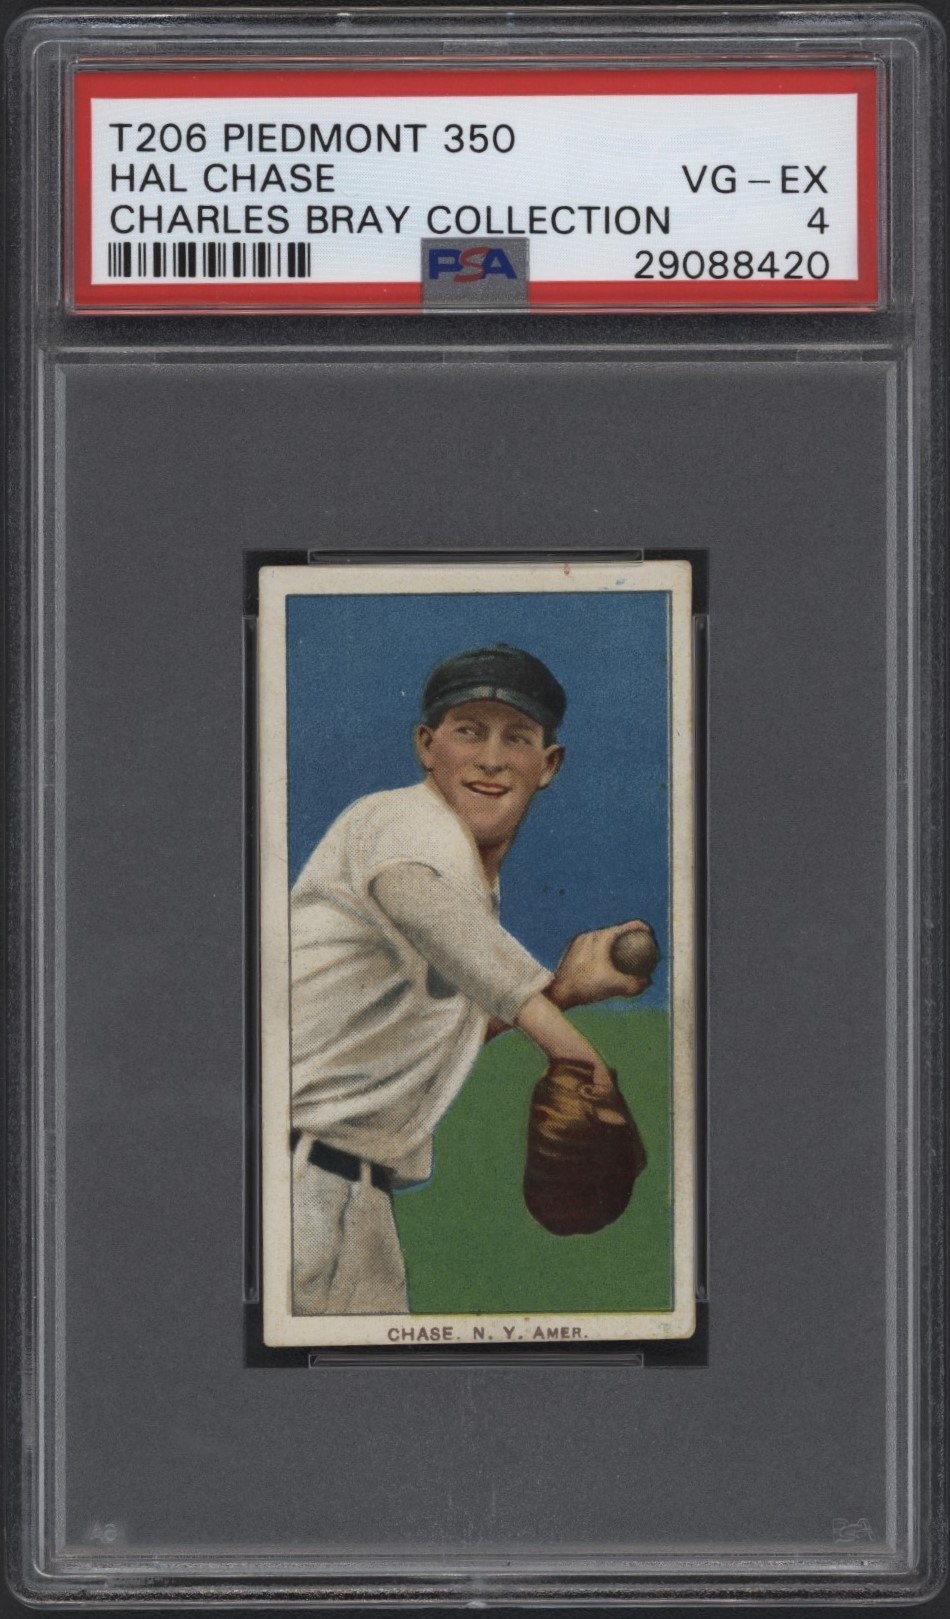 - T206 Piedmont 350 Hal Chase PSA VG-EX 4 From the Charles Bray Collection.